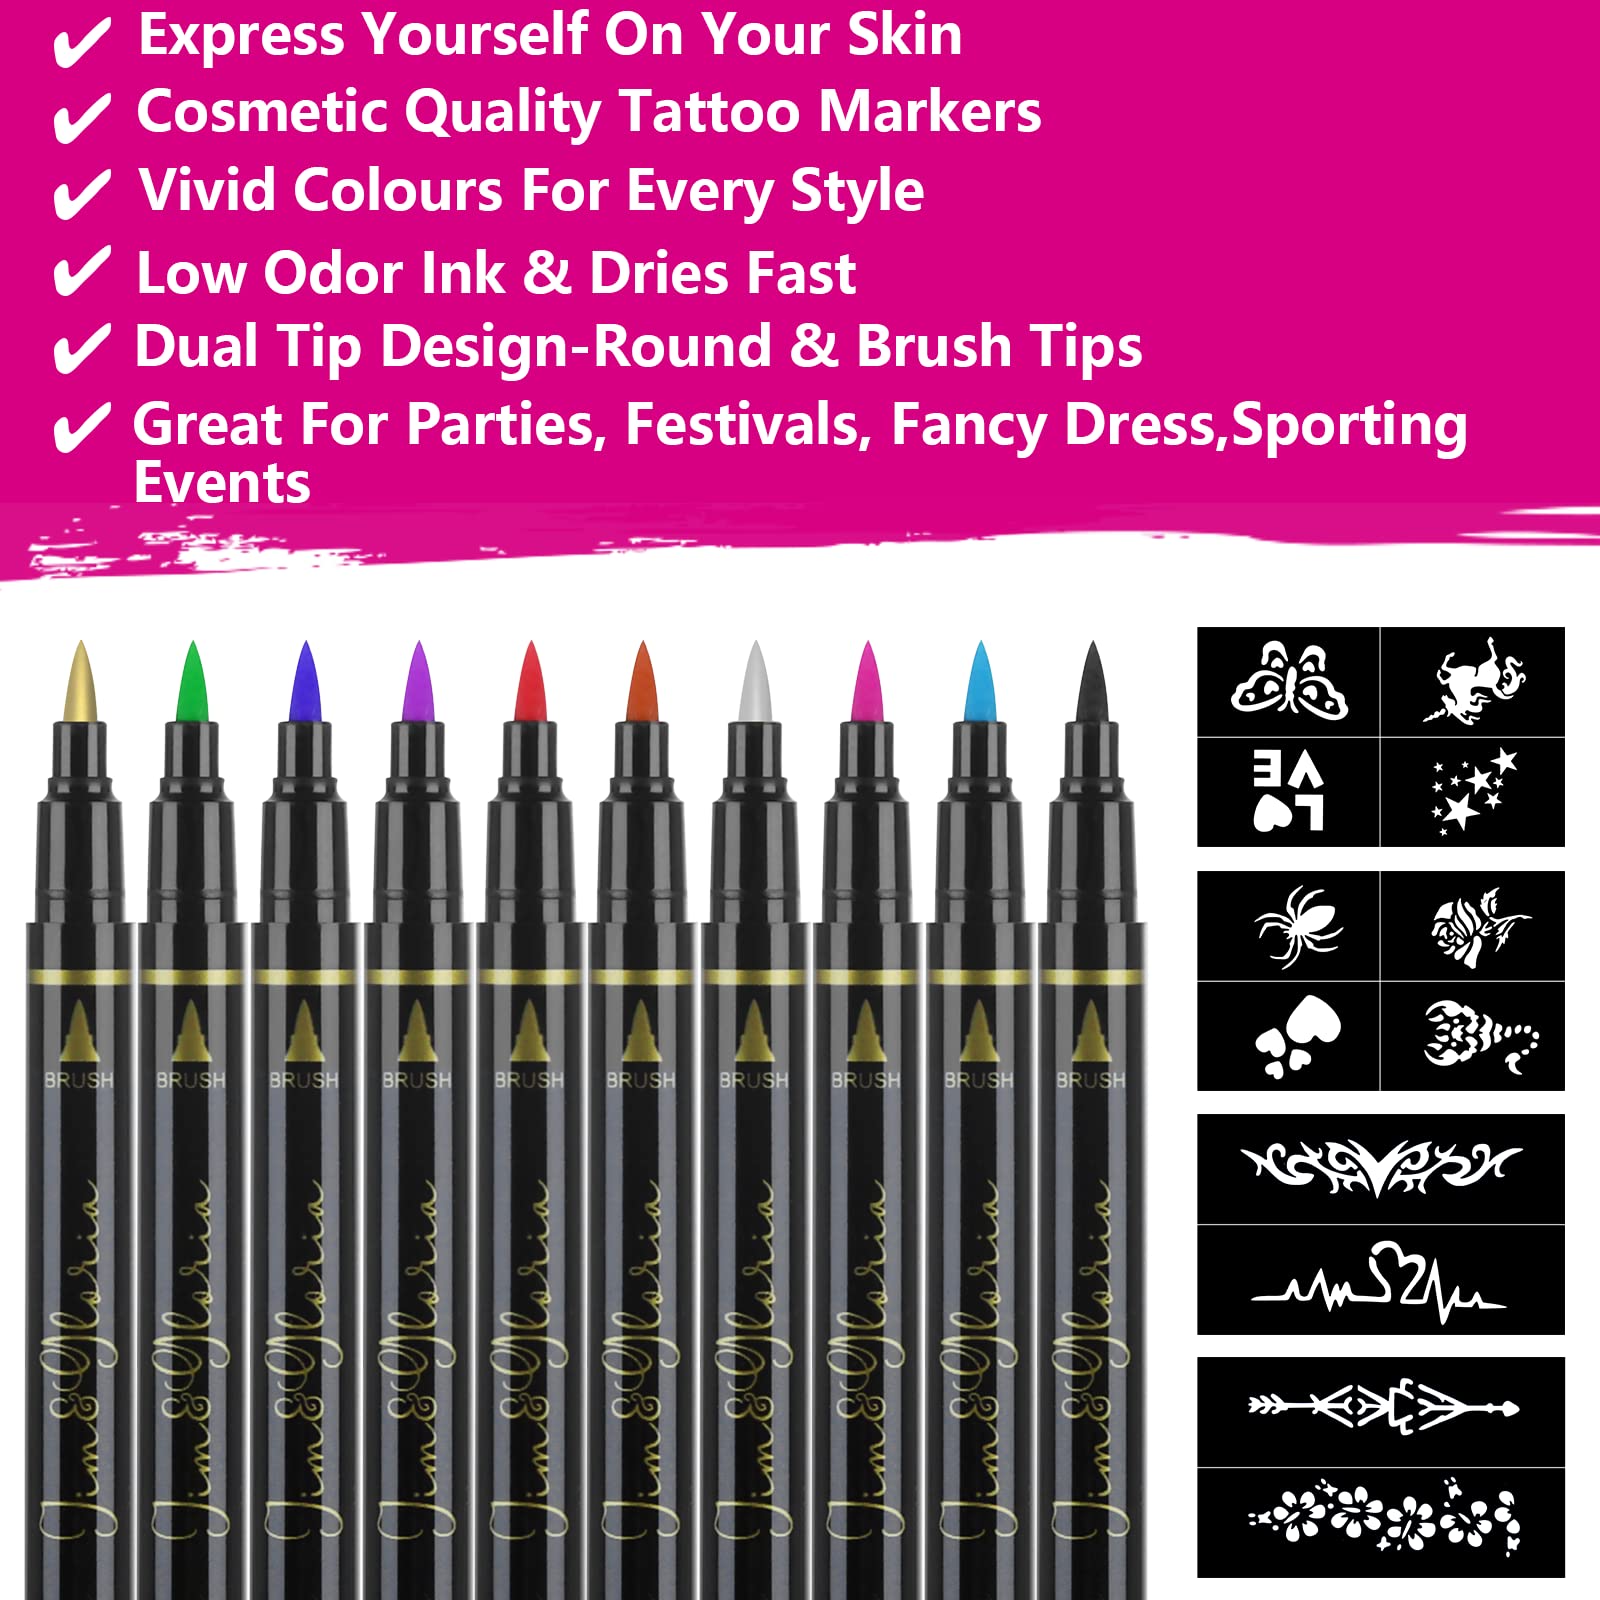 Jim&Gloria Body Art Tattoo Pen Dual Tip 10 Colors With GOLD & SILVER Skin Markers For Kids Adults, Gifts for Teenage Girl, Teen Girls Trendy Stuff 8 9 10 11 12 13 14 + Years Old Stocking Stuffers